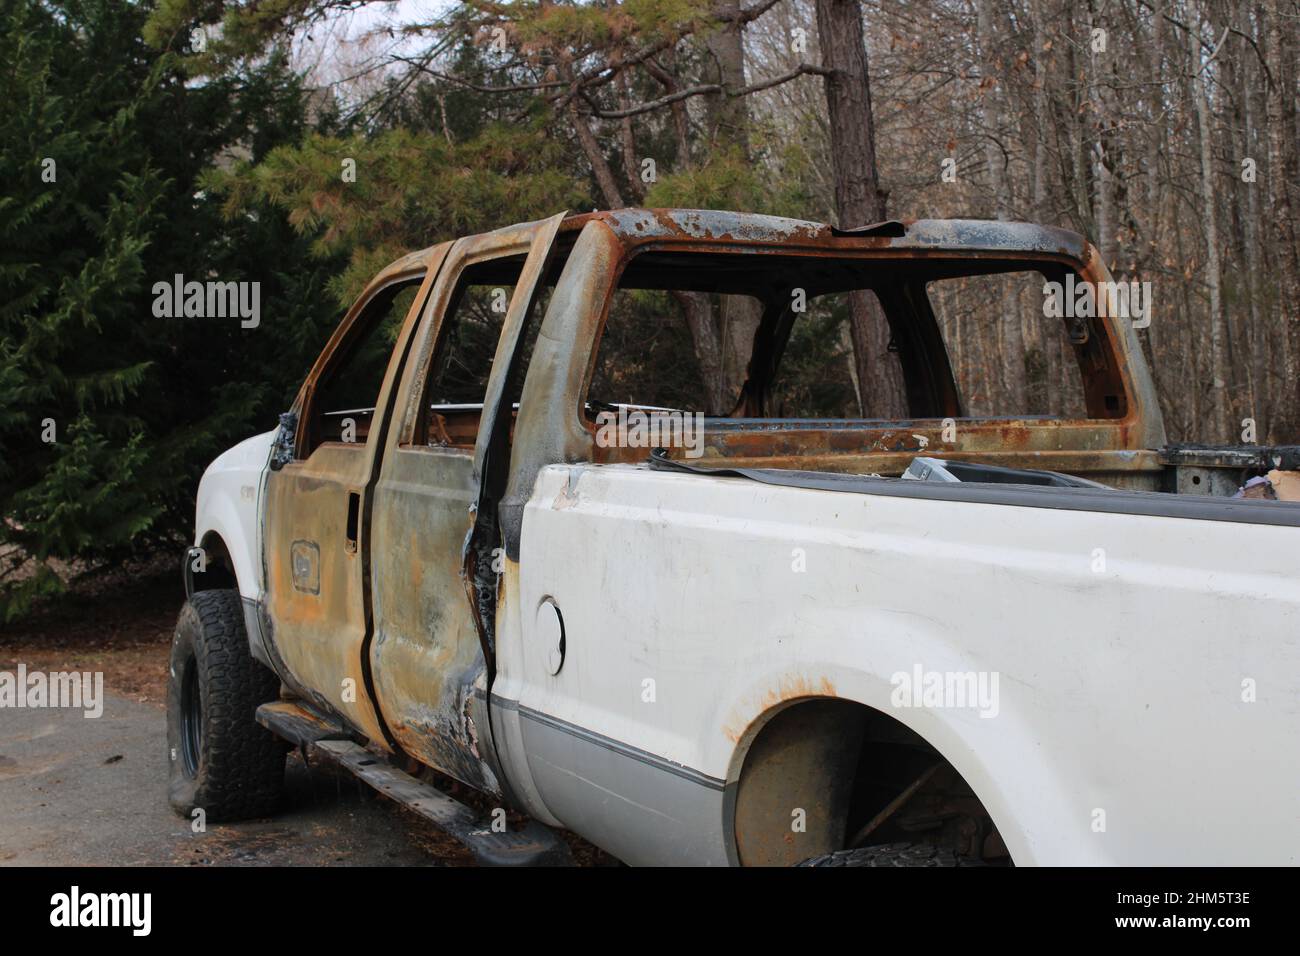 Burned out totaled pickup truck Stock Photo